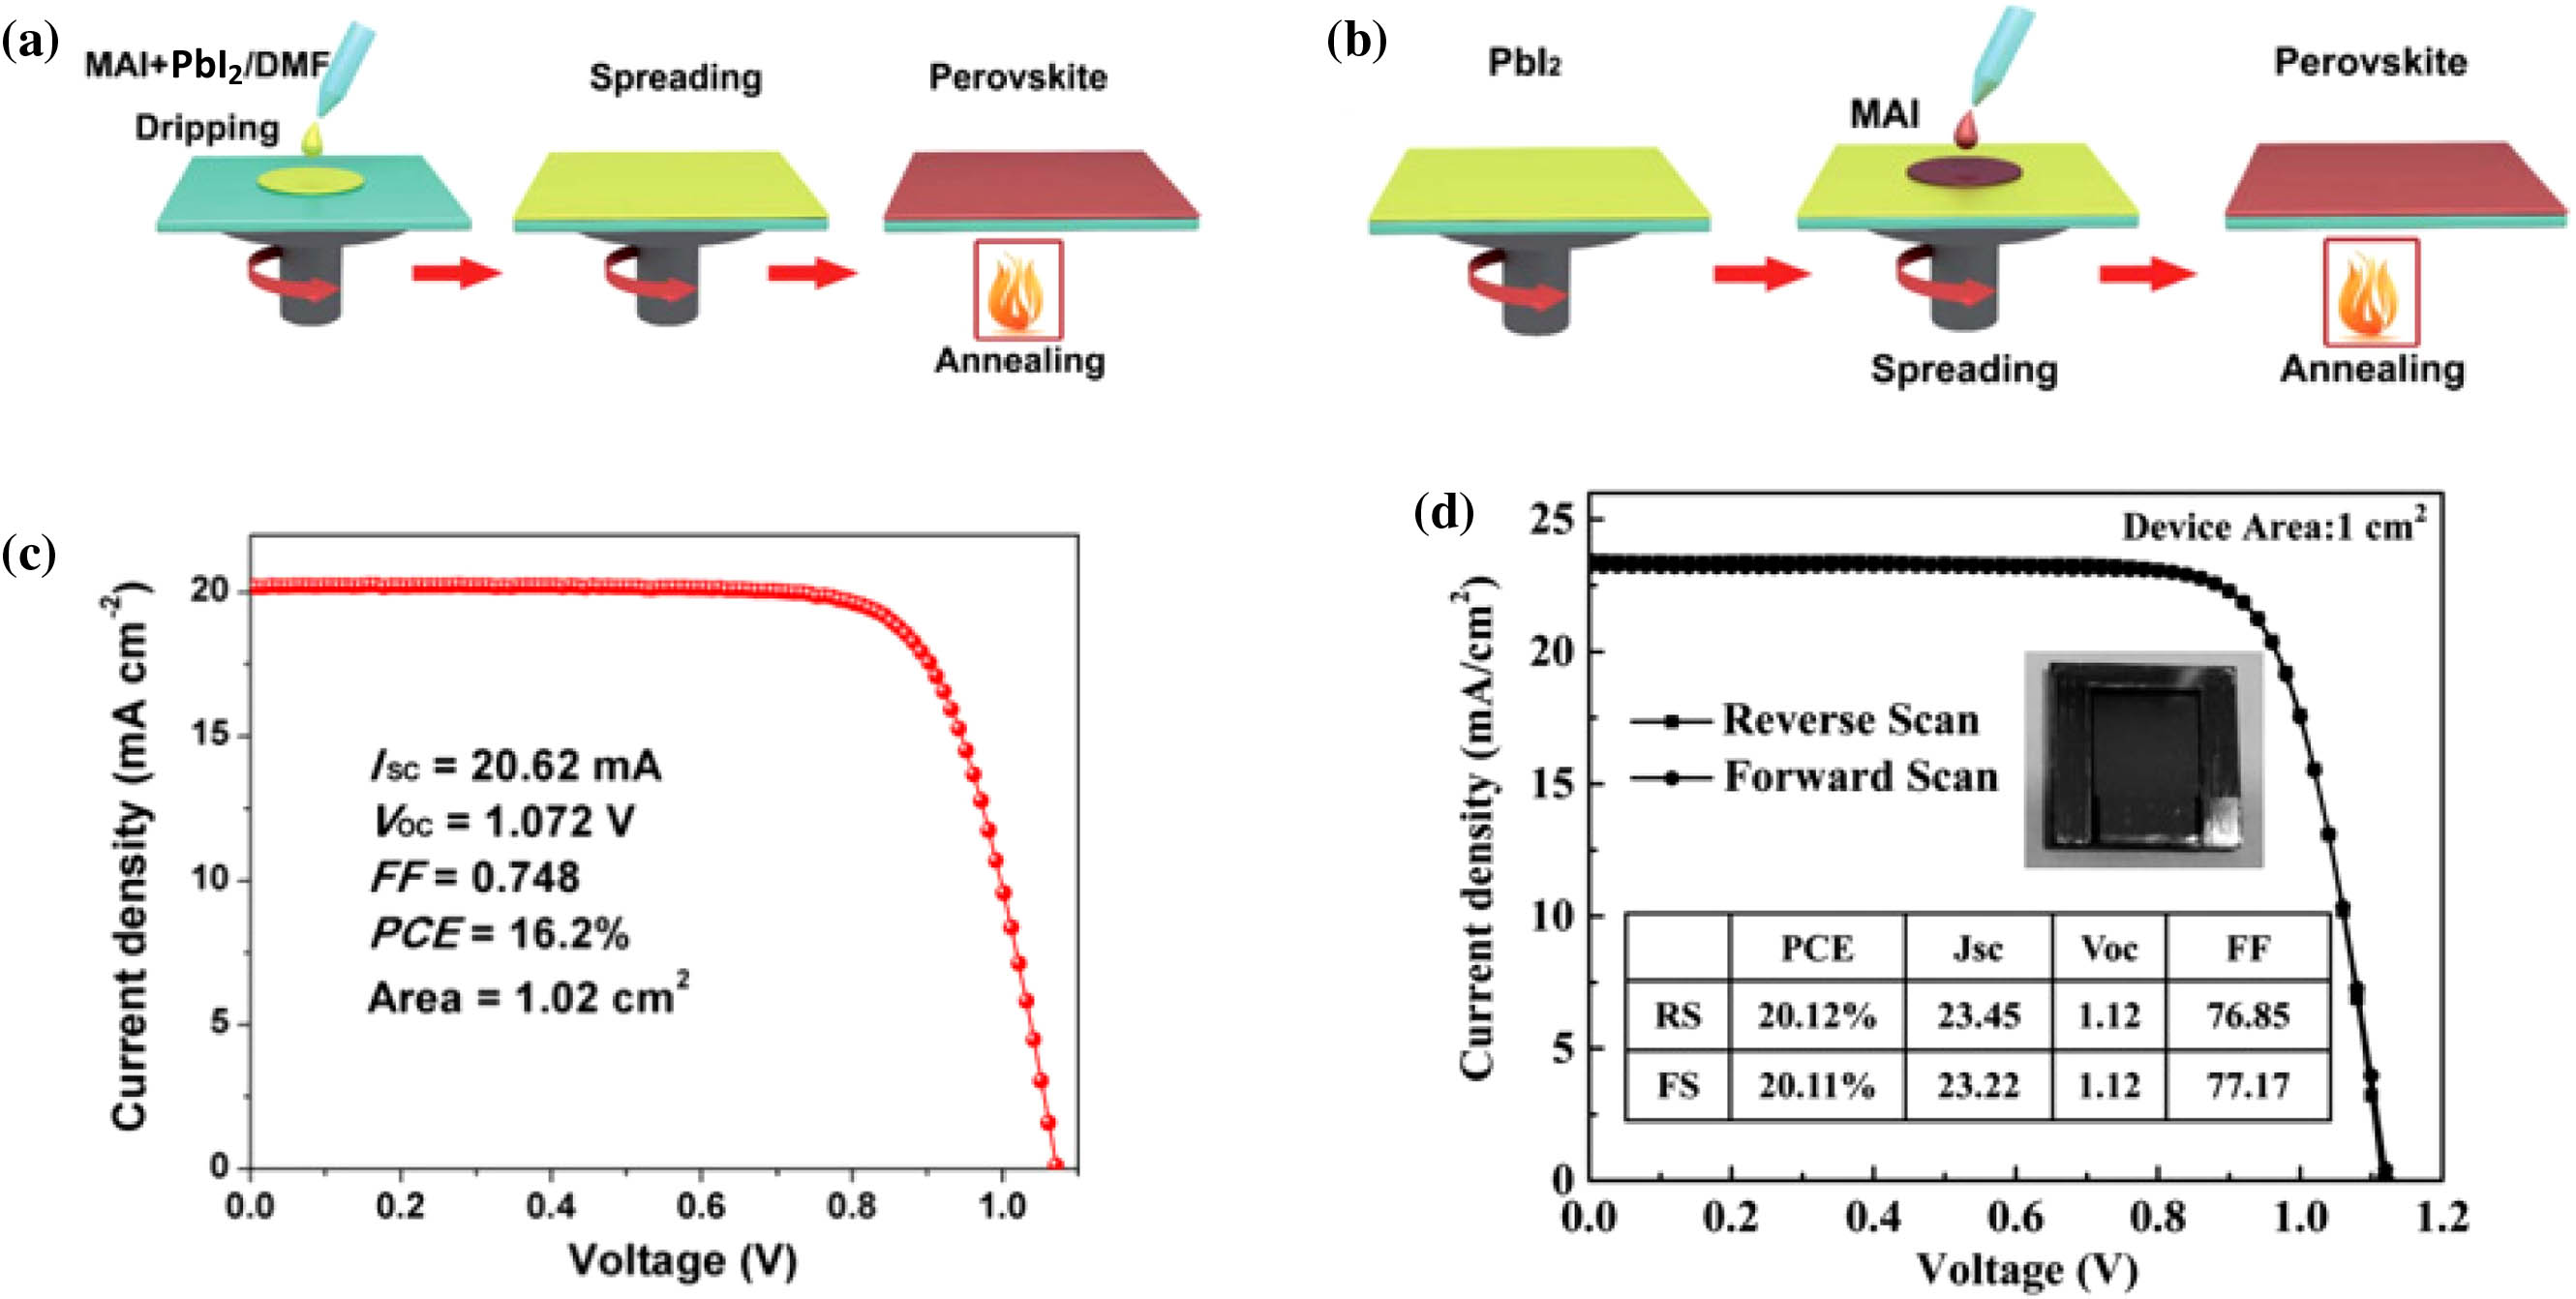 (a) One-step deposited perovskite films. (b) Two-step deposited perovskite films. (c) J-V curve of the best large cell endowed with anti-reflection film. (d) J-V curve of the PSCs in large size of 1 cm2 measured under reverse and forward scan under one-sun condition. (a), (b) Reproduced with permission [26], Copyright 2018, Royal Society of Chemistry. (c) Reproduced with permission [17], Copyright 2015, American Association for the Advancement Science. (d) Reproduced with permission [19], Copyright 2017, Nature Publishing Group.